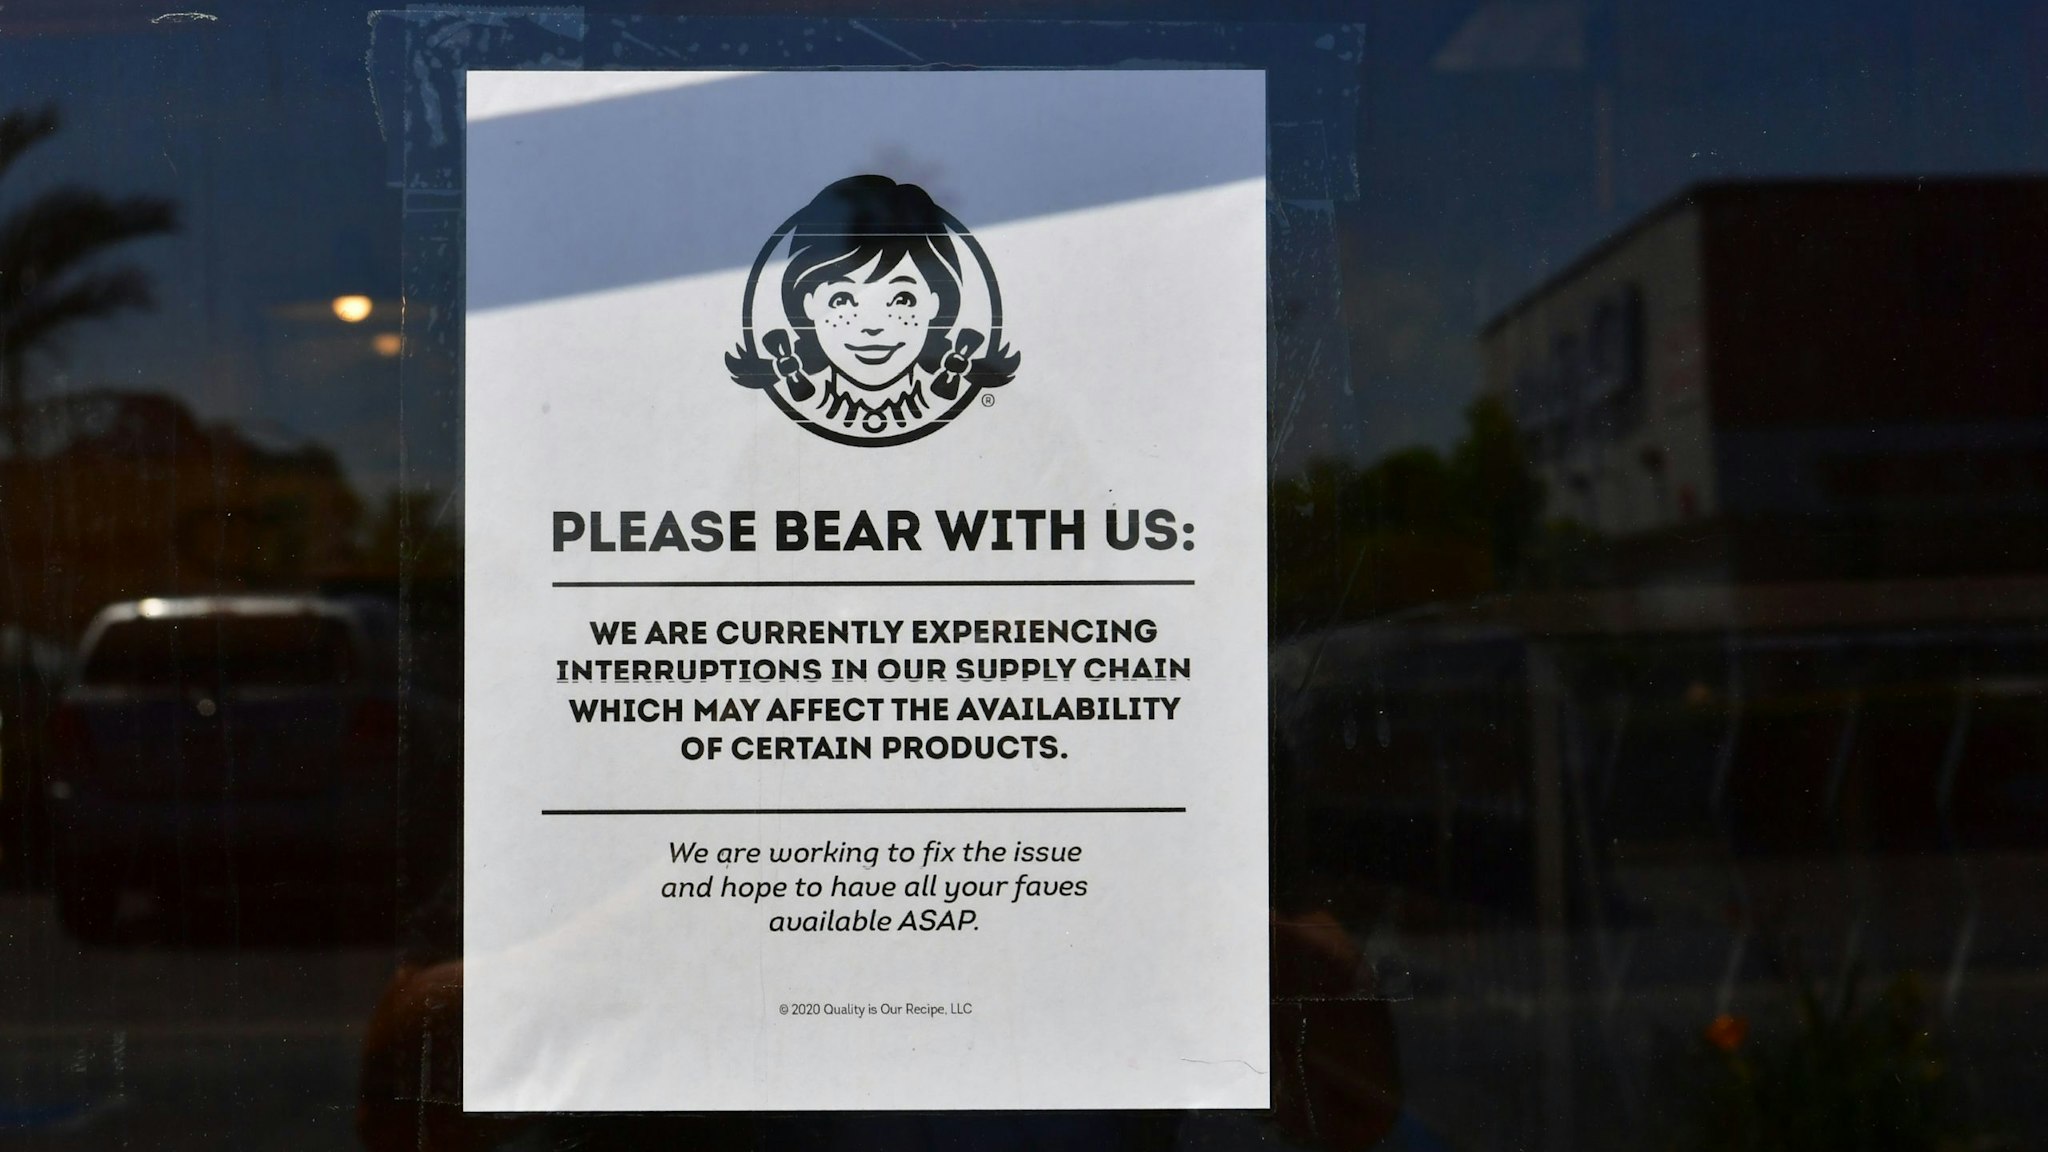 A sign posted on a walk-in entrance to a Wendy's fast food restaurant in Alhambra, California on May 5, 2020. - A sign displayed on the walk-in entrance mentions an interruption in supply chain affecting availability of certain products. Wendy's, an international chain restaurant famous for the 1984 catchphrase "Where's the Beef?" is experiencing a beef shortage caused by the coronavirus pandemic, as some restaurants stop serving burgers. (Photo by Frederic J. BROWN / AFP) (Photo by FREDERIC J. BROWN/AFP via Getty Images)